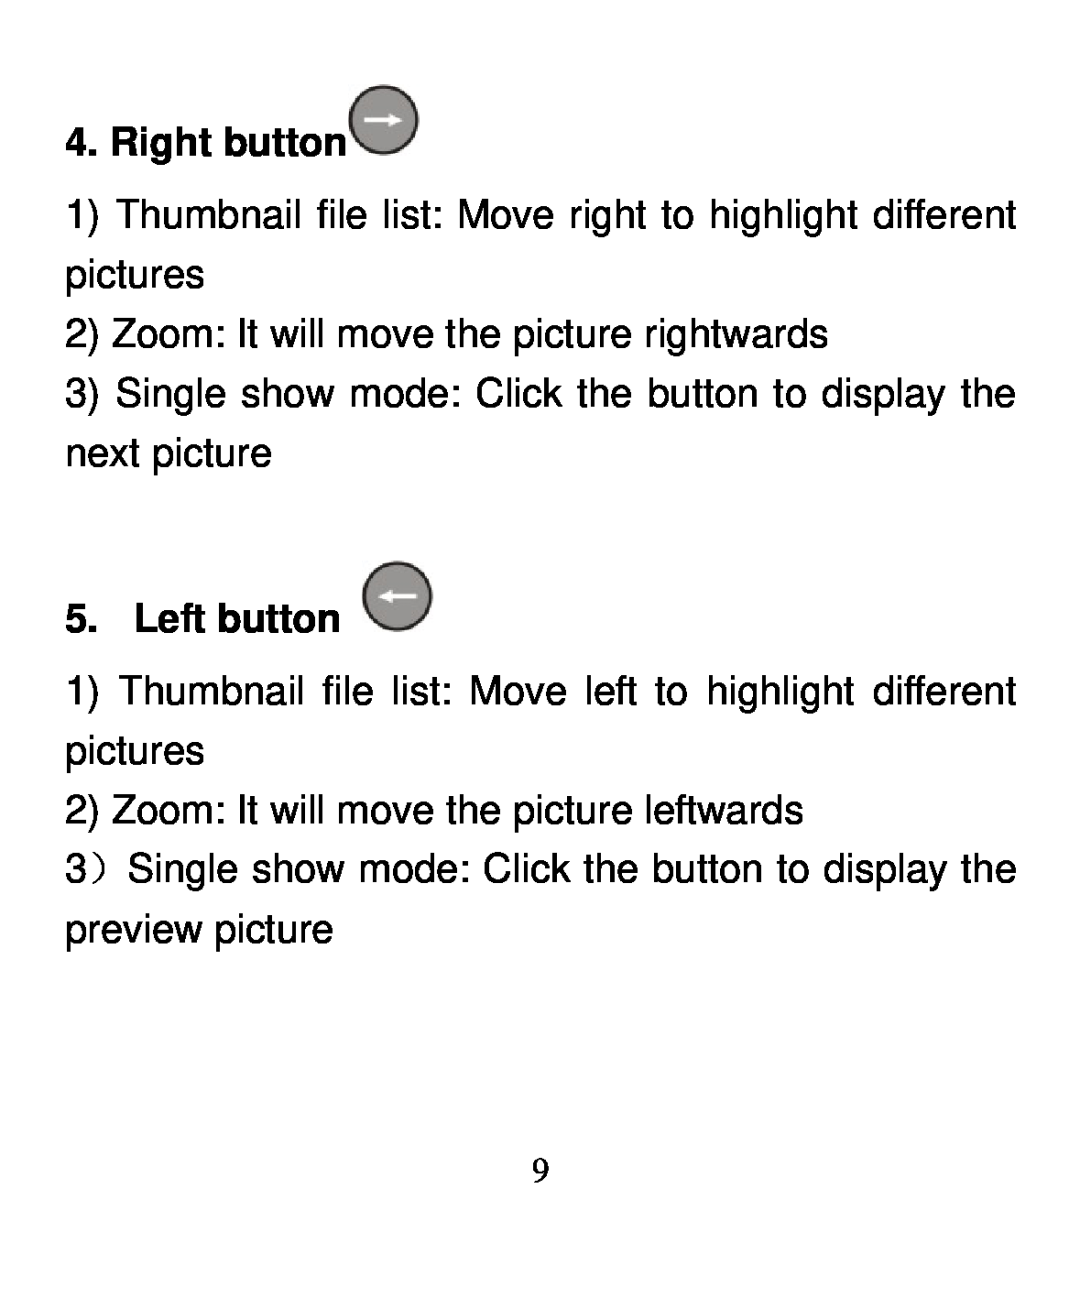 Nextar N3-502 user manual Right button, Thumbnail file list Move right to highlight different pictures, Left button 